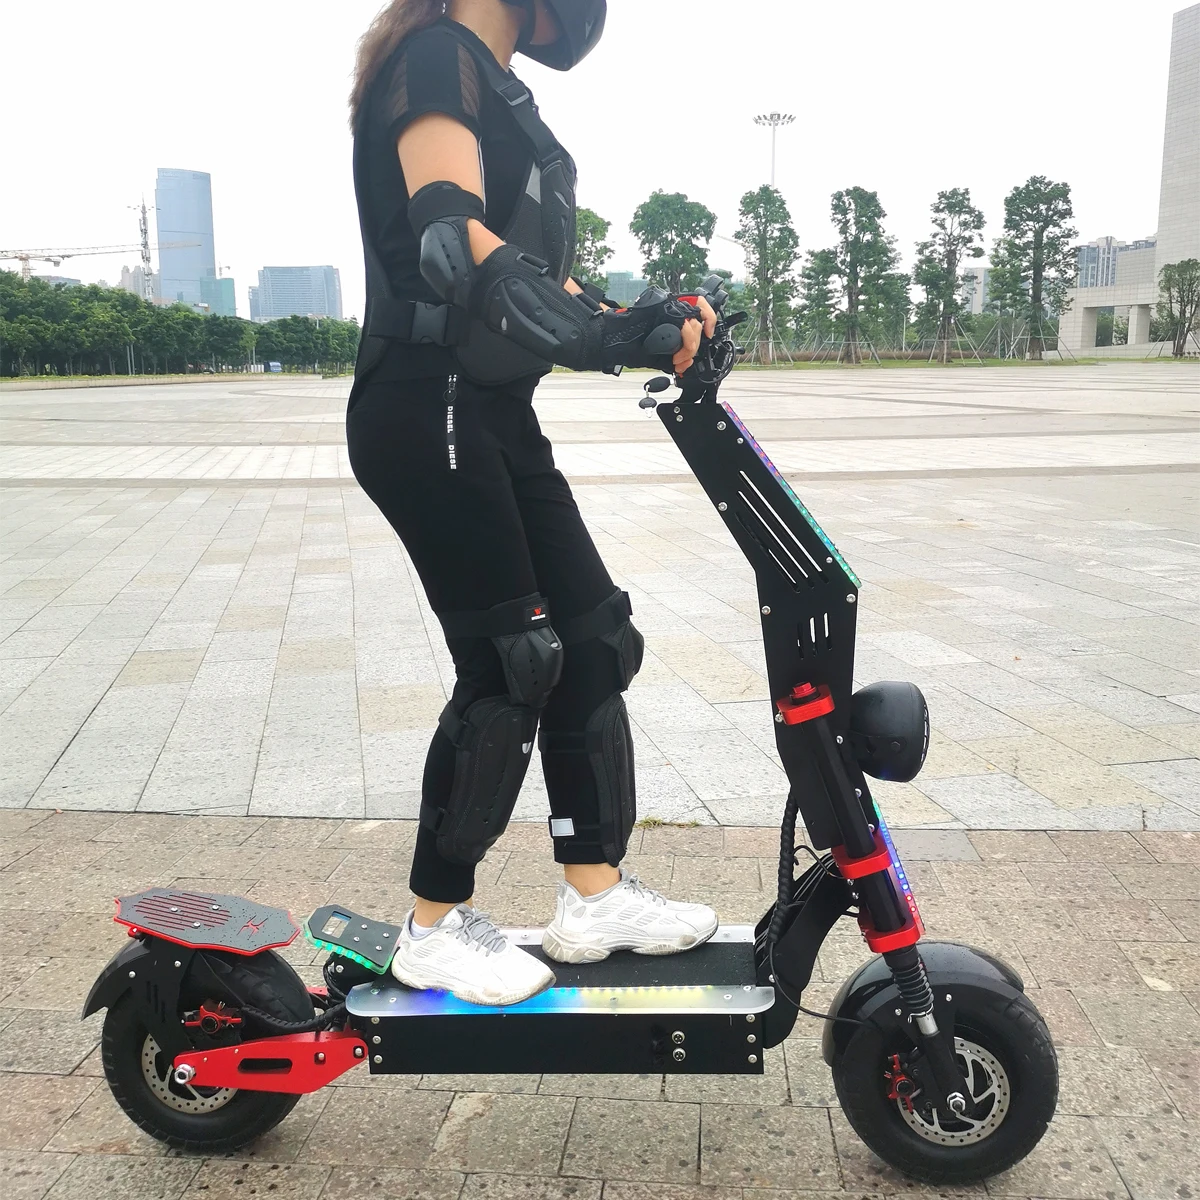 

Maike MKX new arrival Foldable Motorcycle e scooter long range 60V 35AH 8000W 85km/h Motor Power for adult electric scooter